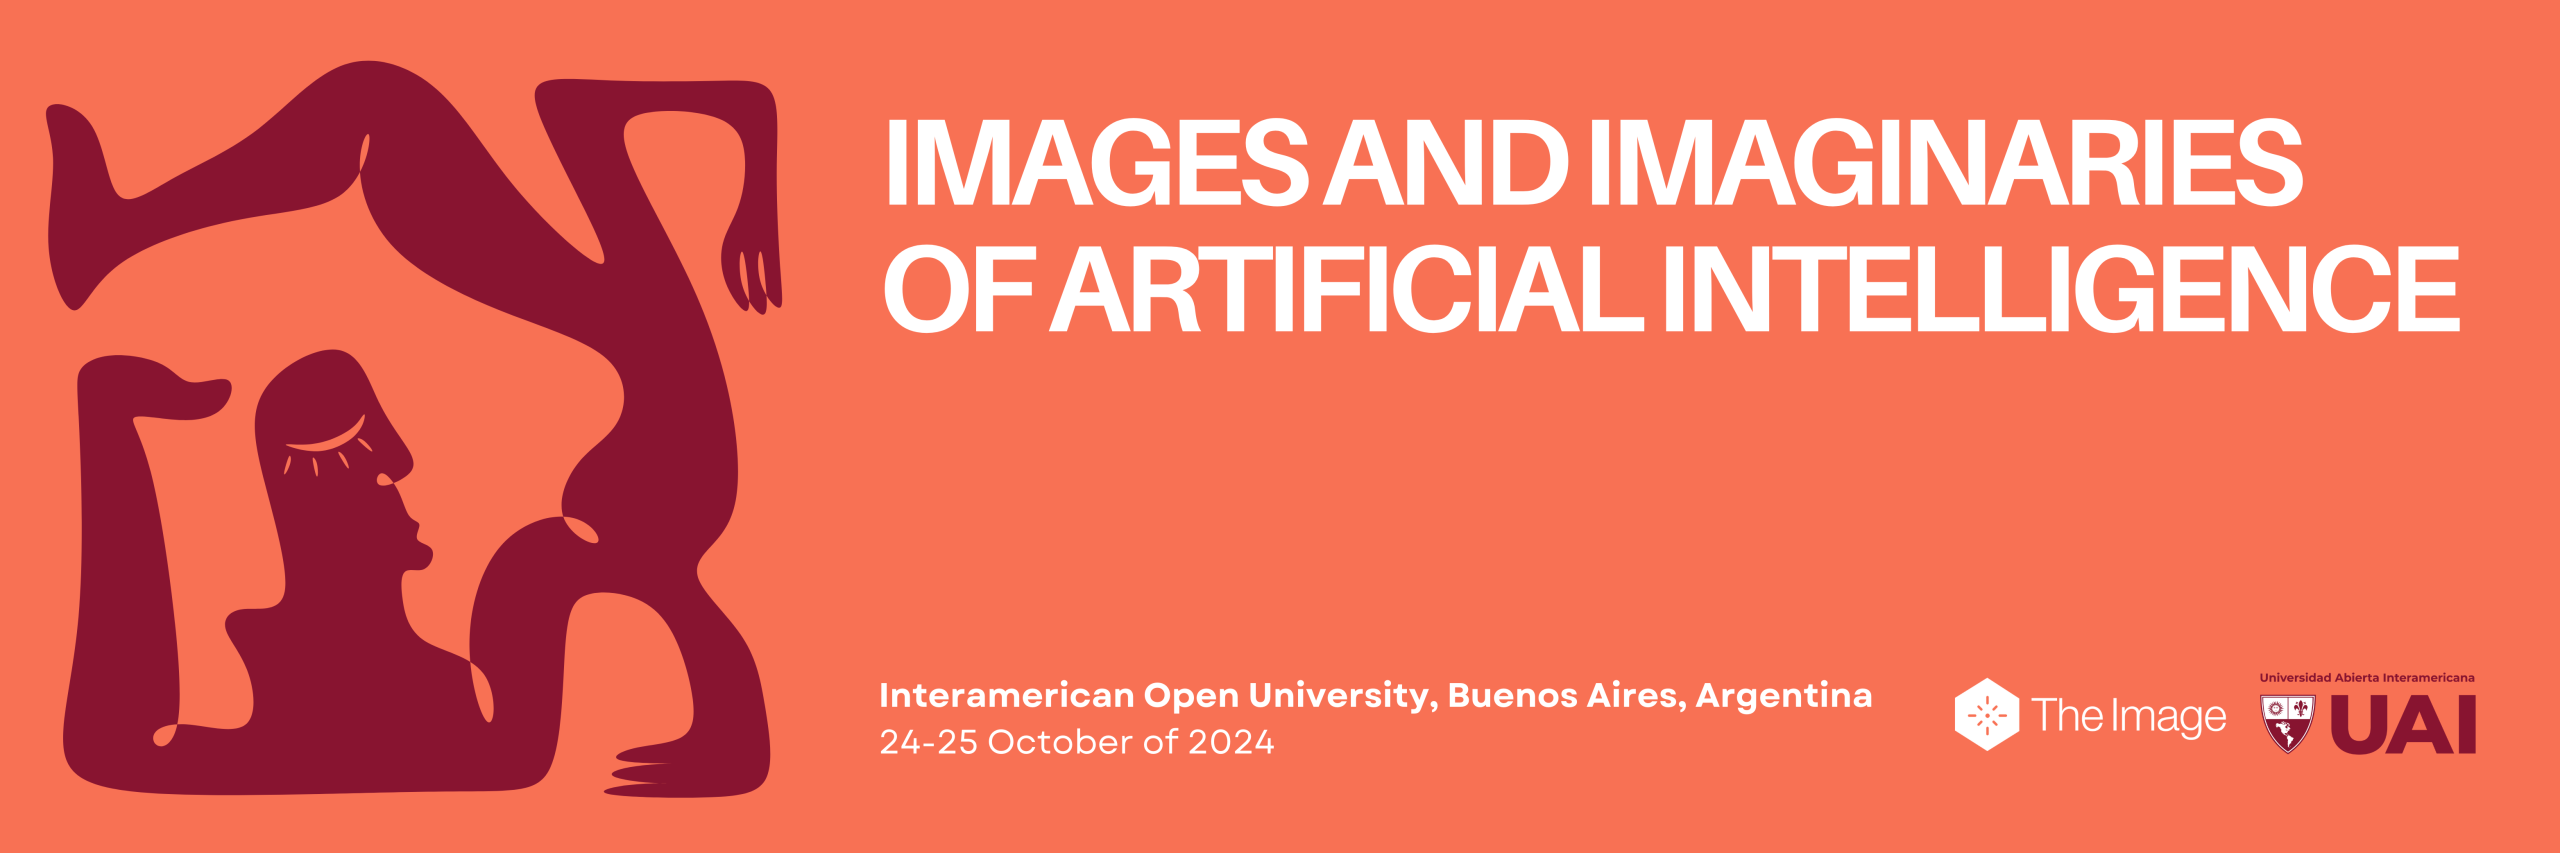 Fifteenth International Conference on The Image